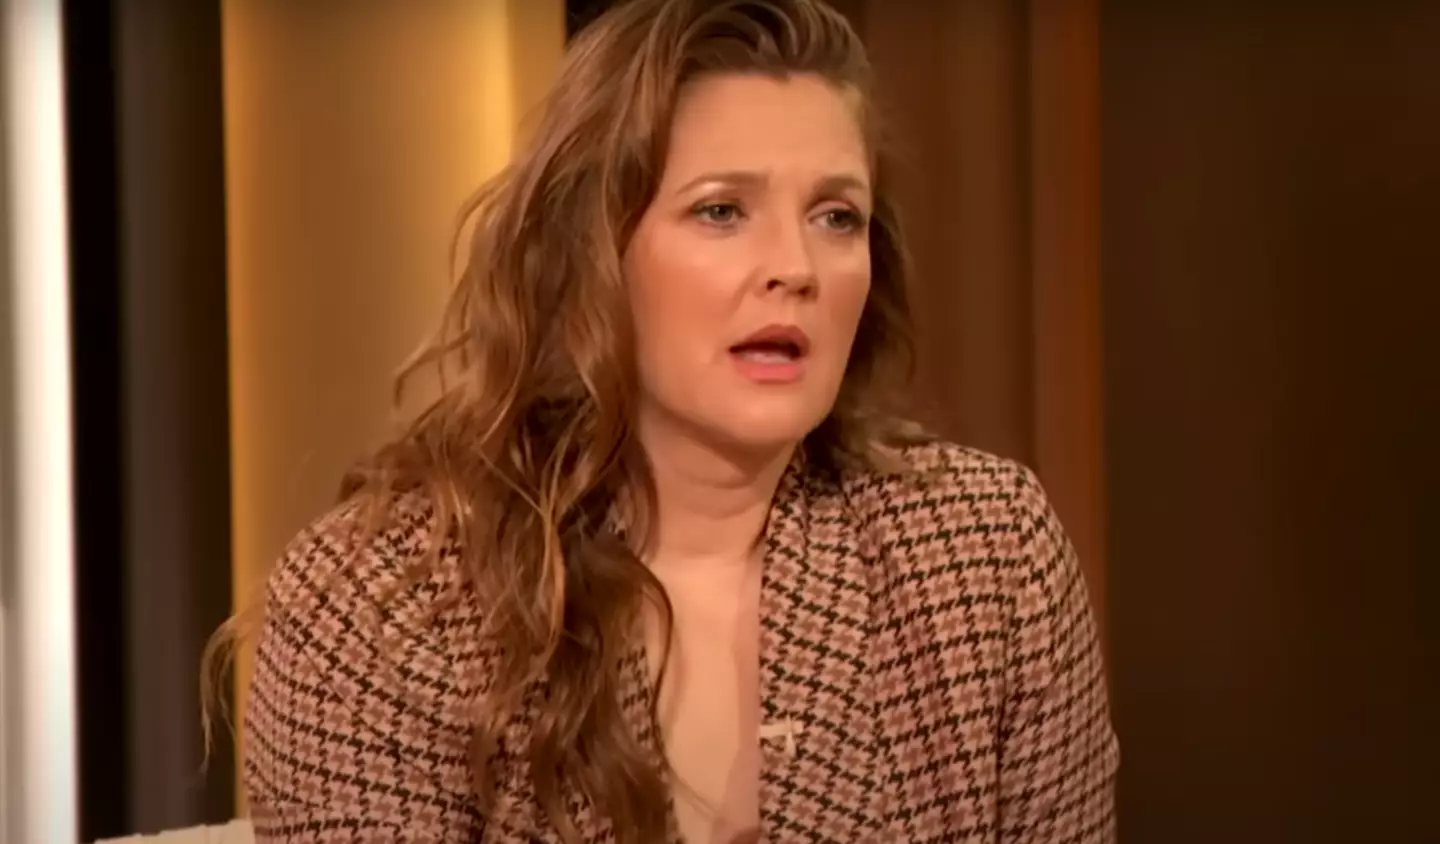 Drew Barrymore said her proudest moment was when she stopped drinking. (YouTube/The Drew Barrymore Show)